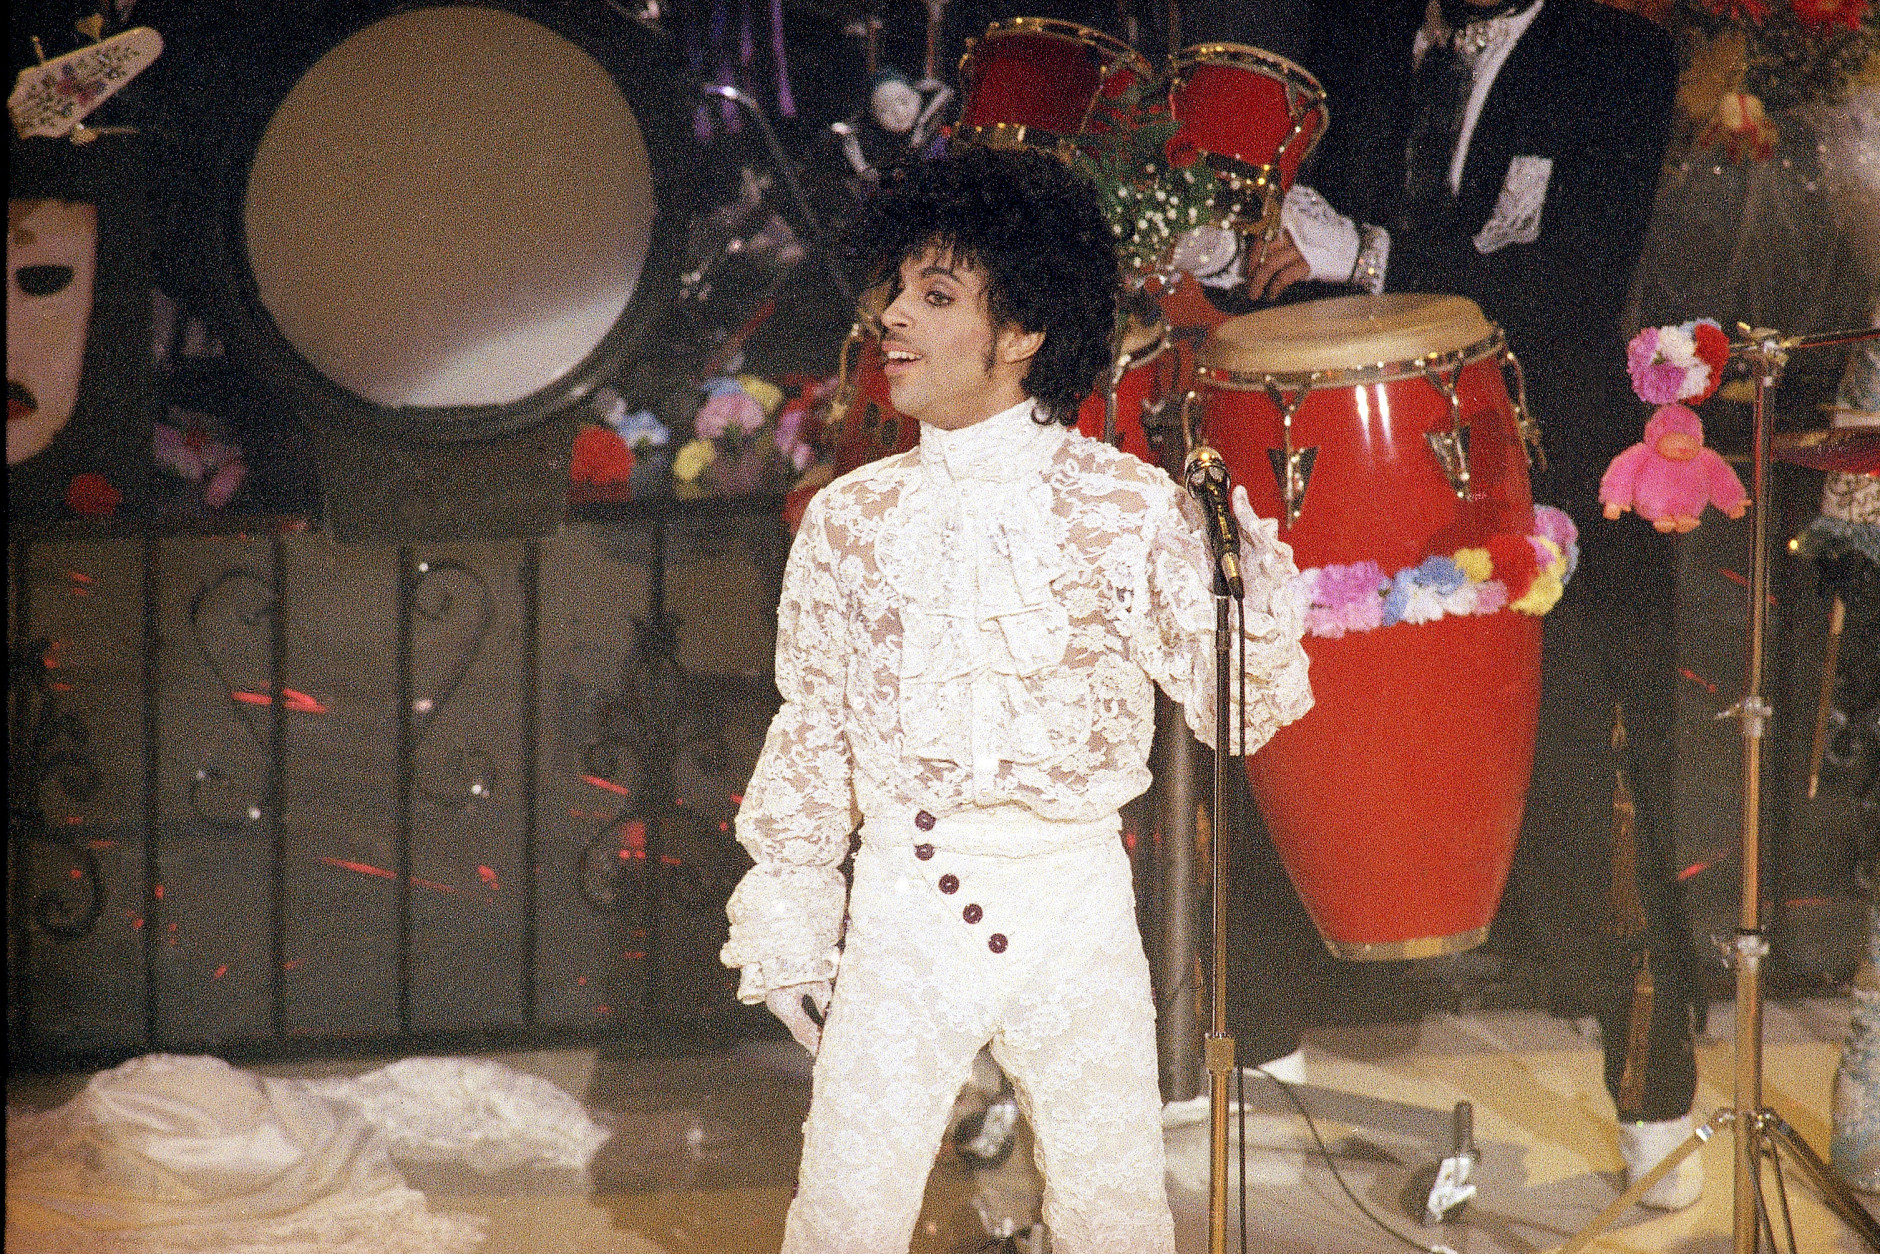 Singer Prince performs at the 1985 Grammys Award at the Shrine Auditorium in Los Angeles, Feb. 26, 1985. (AP Photo)